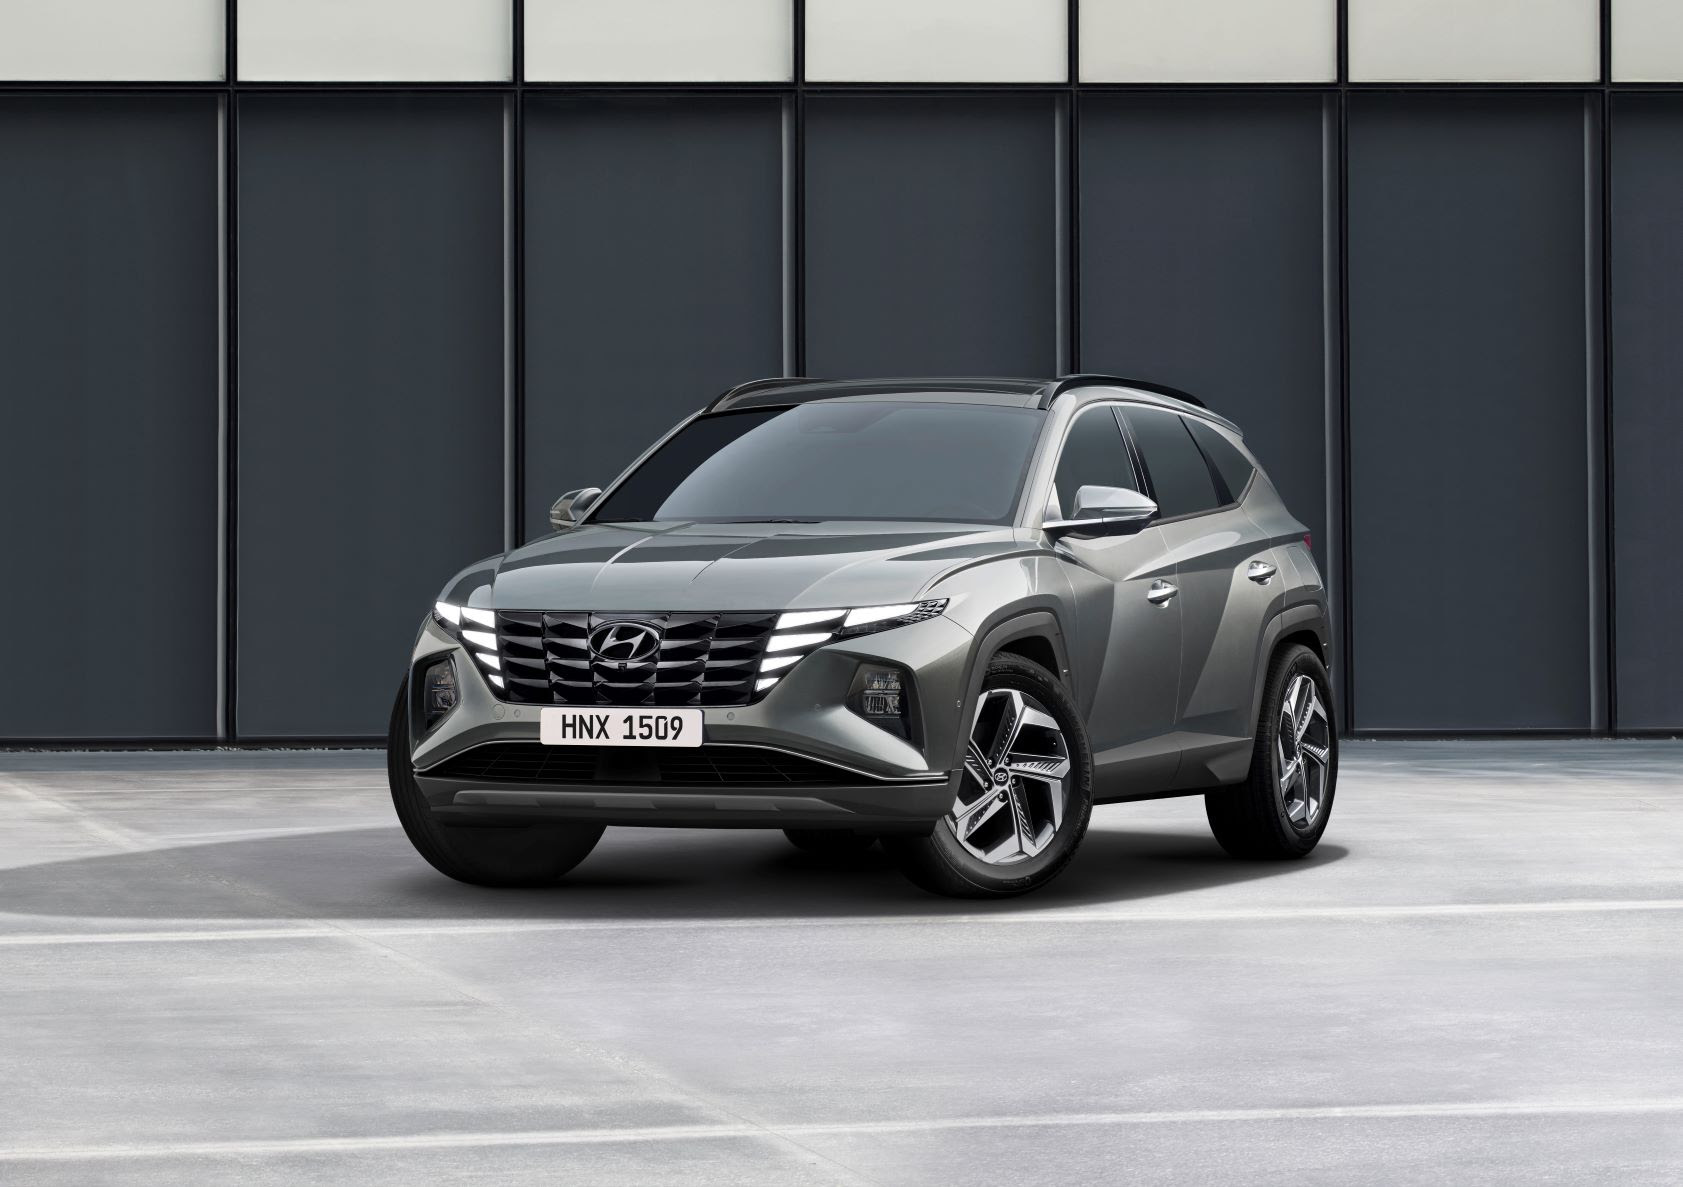 Hyundai Launches Dynamic New Tucson with Best-in-Segment Features and Class-Leading Capabilities